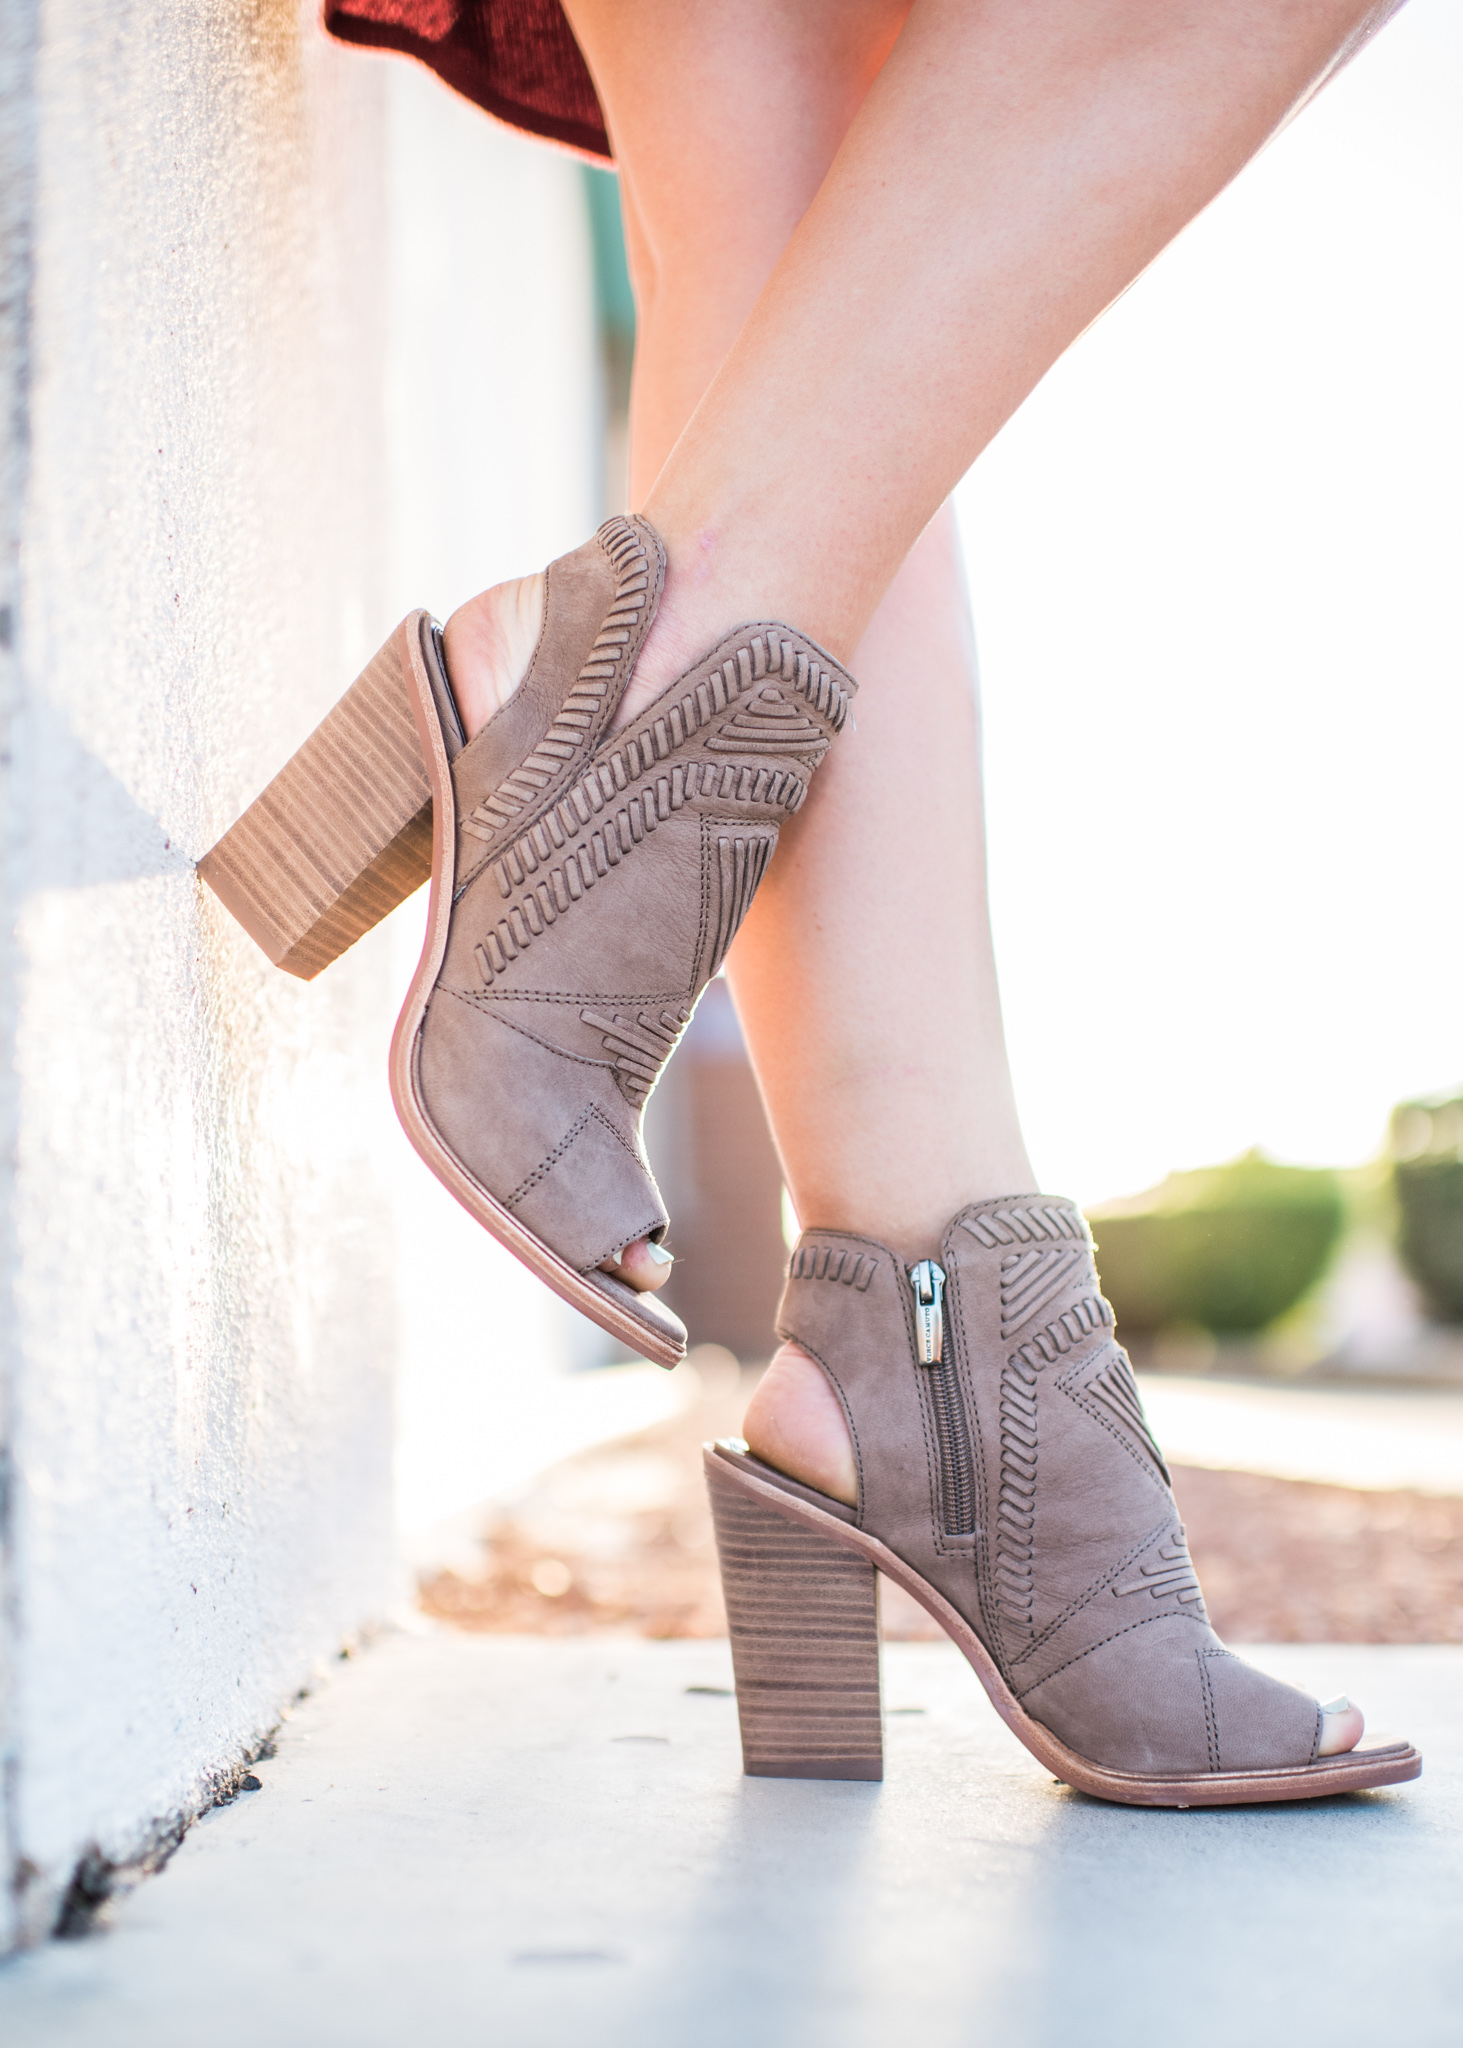 Vince Camuto Booties